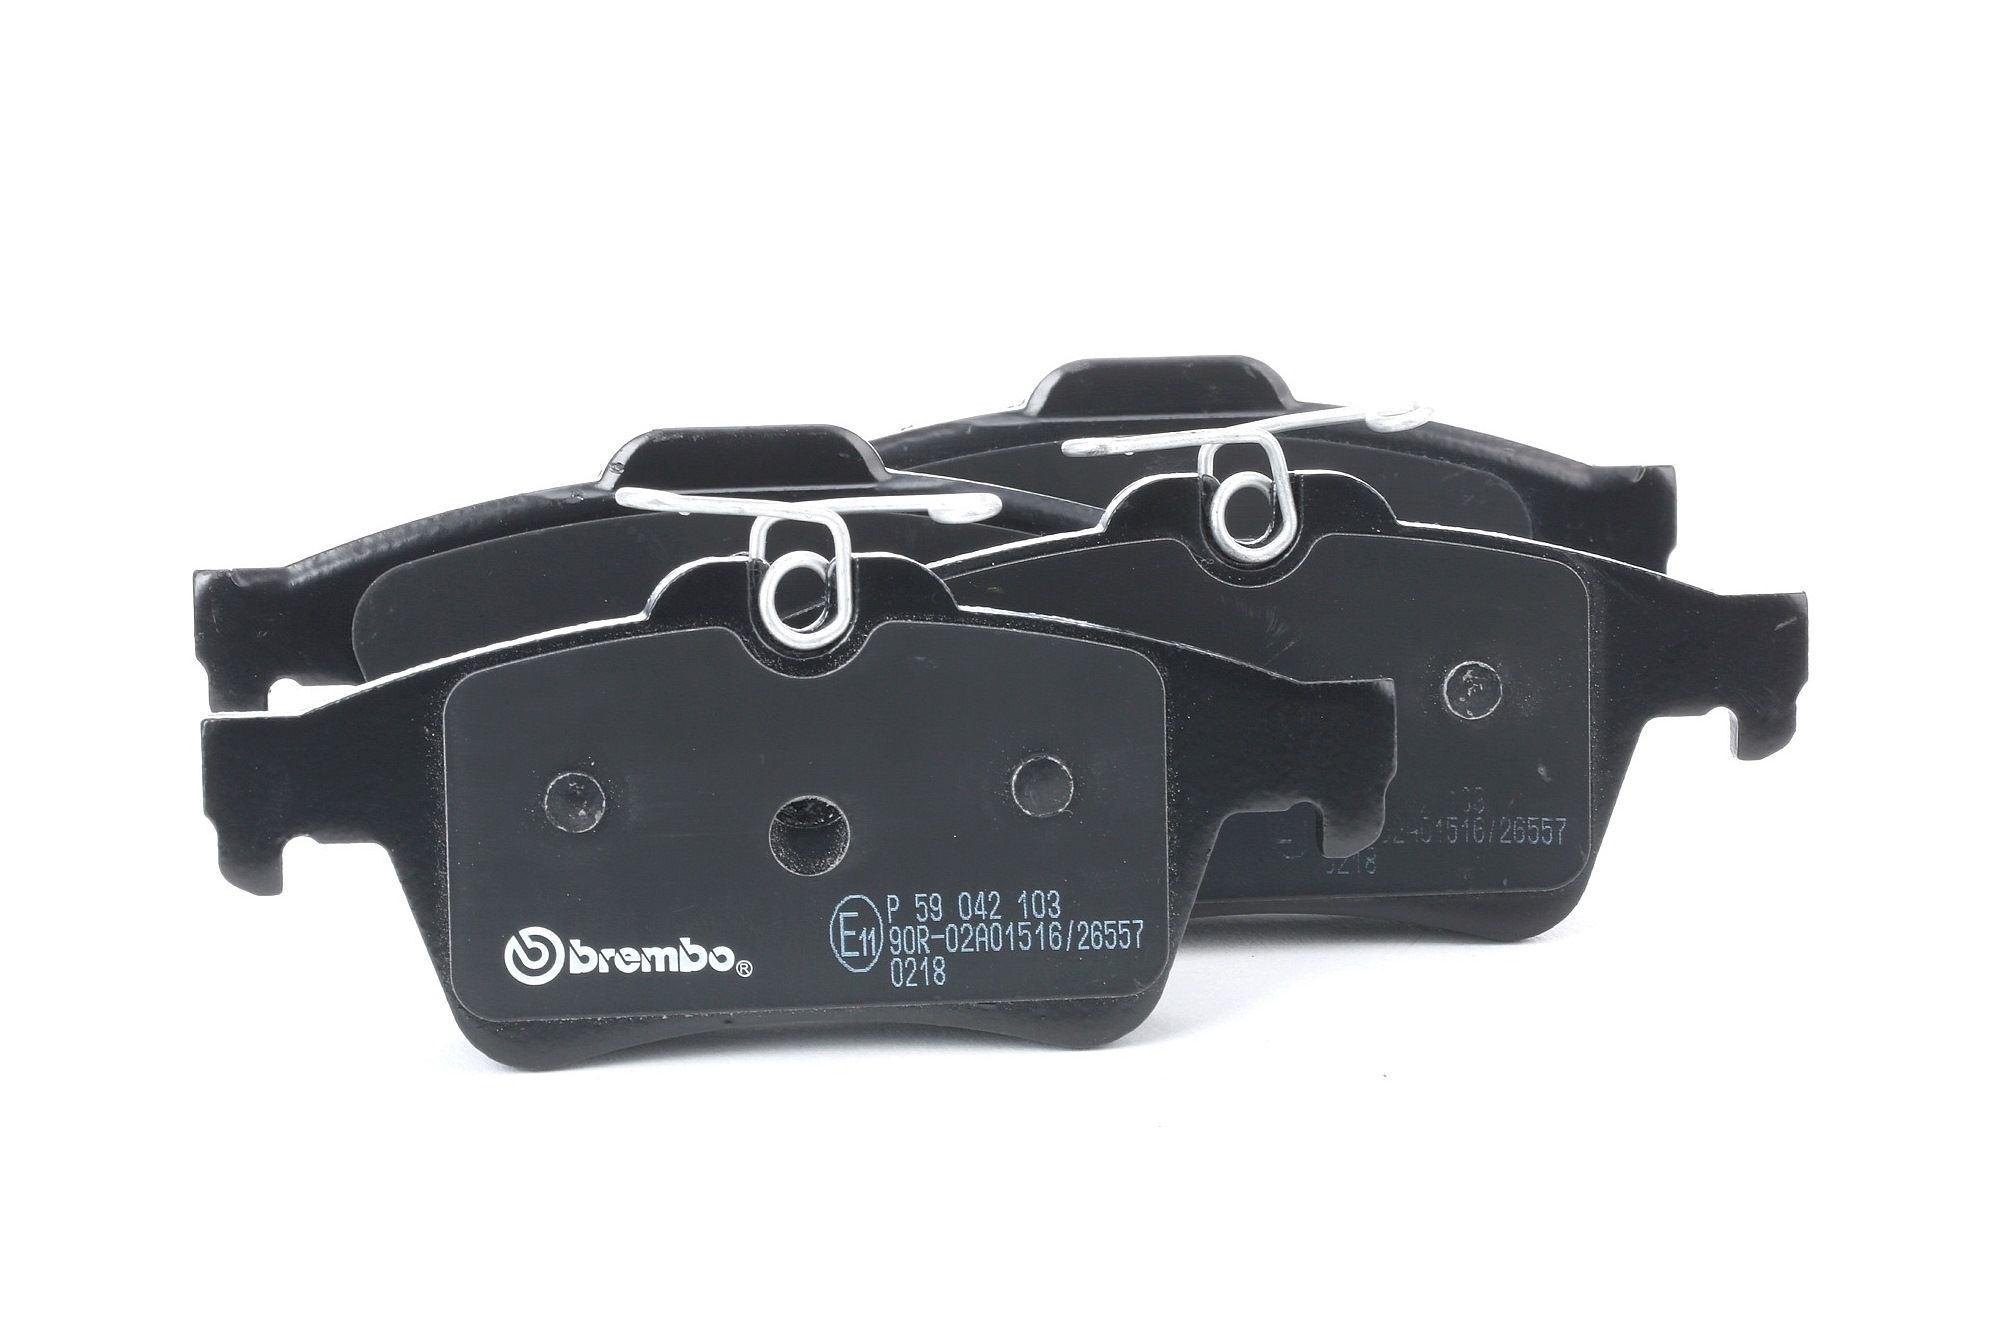 BREMBO %ART_NO_SYN_CLEAR% %DYNAMIC_AUTOPART_SYNONYM% Jaguar S Type x200 4.2 V8 2008 305 PS - Premium Autoteile-Angebot